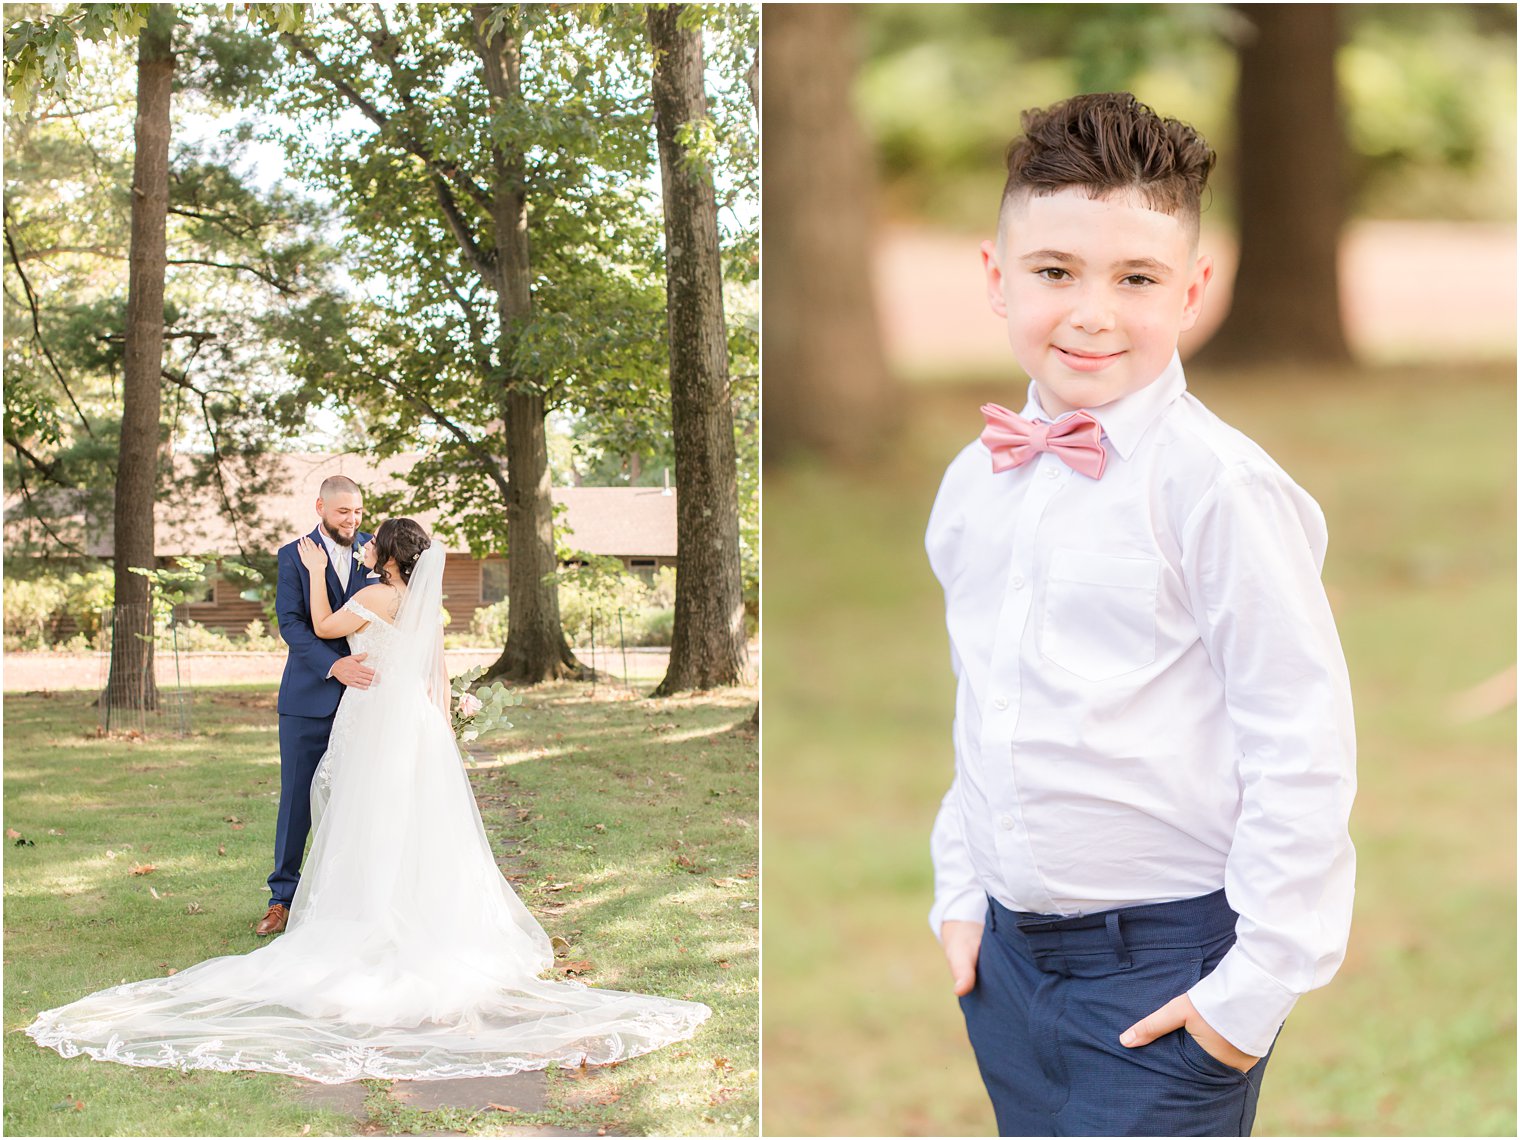 newlyweds pose next to son in pink bowtie on wedding day